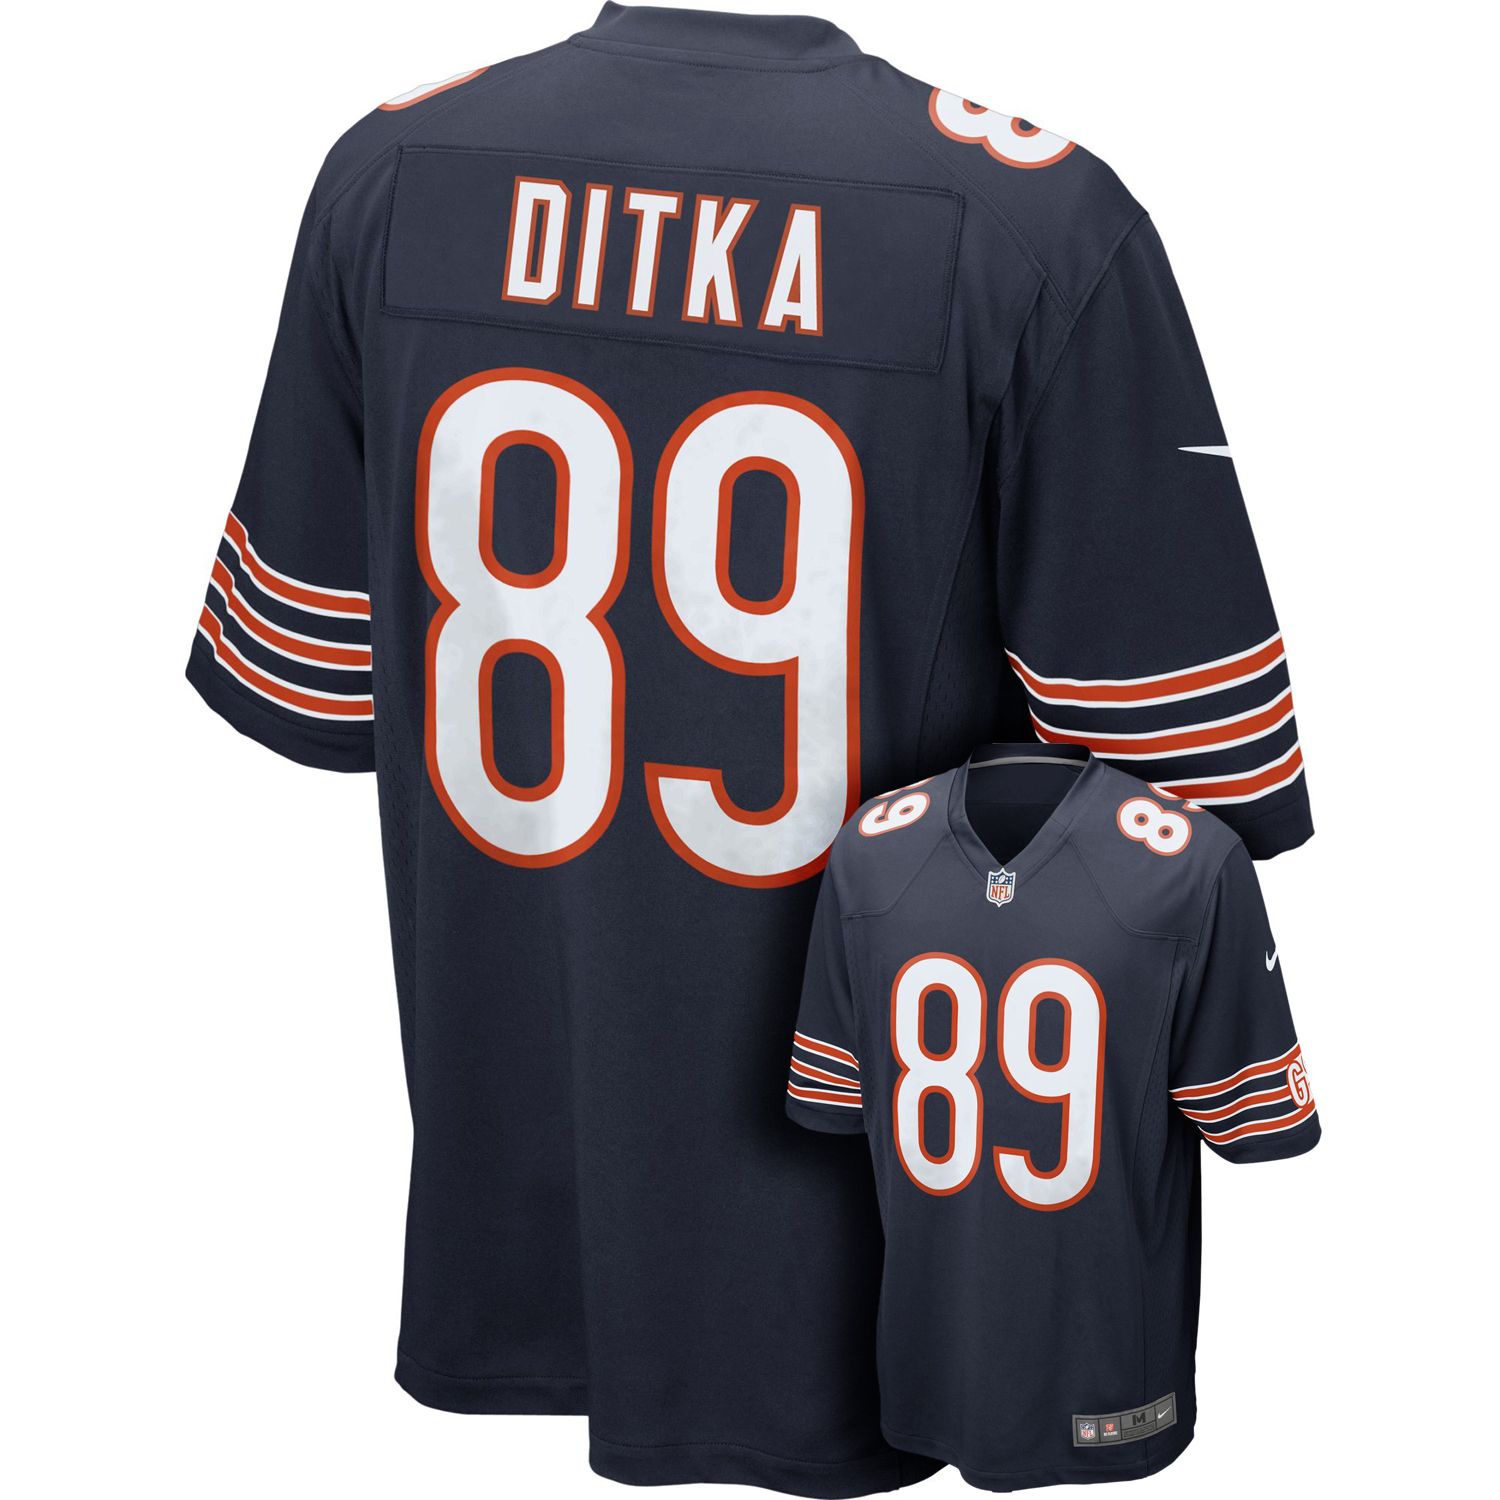 Mike Ditka Game NFL Replica Jersey